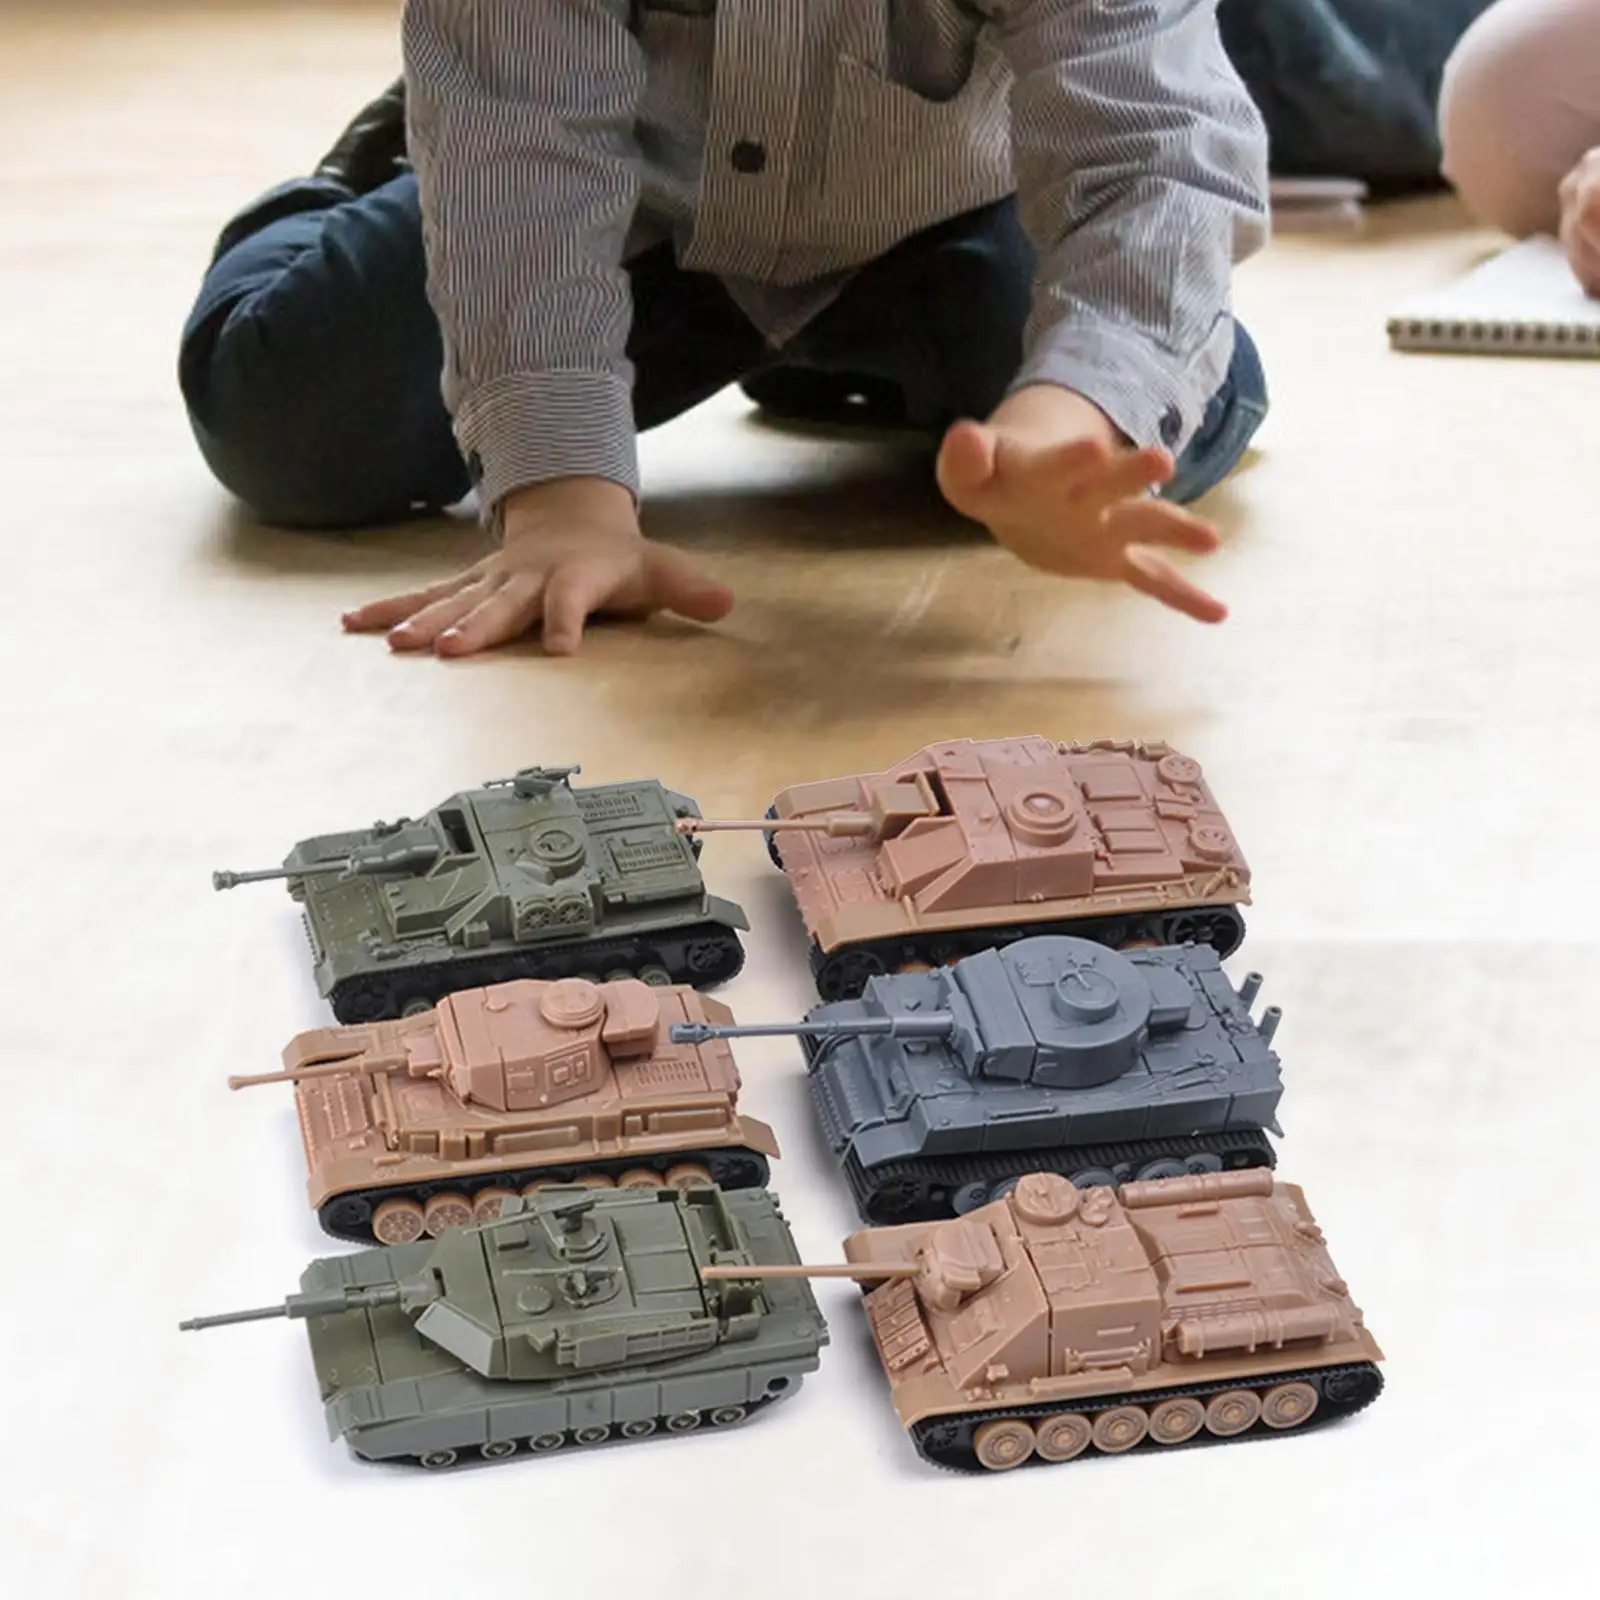 6 Pieces Tank Model DIY Assemble Collectibles Decorative Toys Military Display Party Favors Durable for Beginners Teenagers